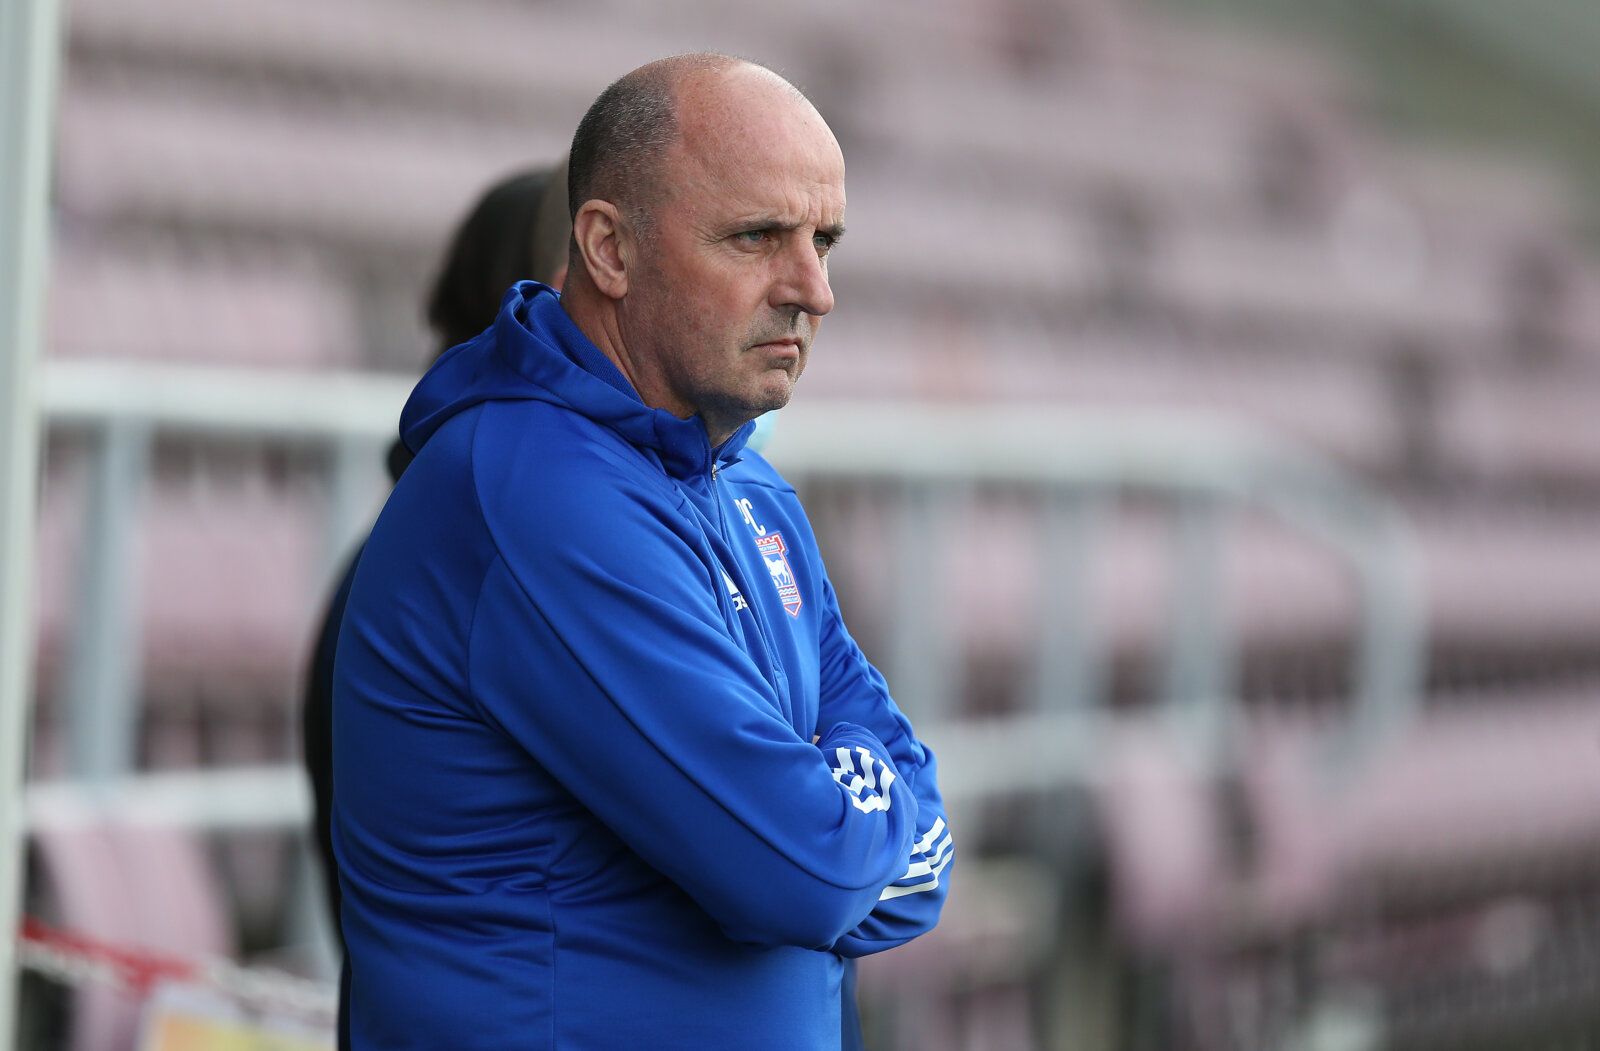 NORTHAMPTON, ENGLAND - APRIL 20: Ipswich Town manager Paul Cook looks on prior to the Sky Bet League One match between Northampton Town and Ipswich Town at PTS Academy Stadium on April 20, 2021 in Northampton, England. (Photo by Pete Norton/Getty Images)